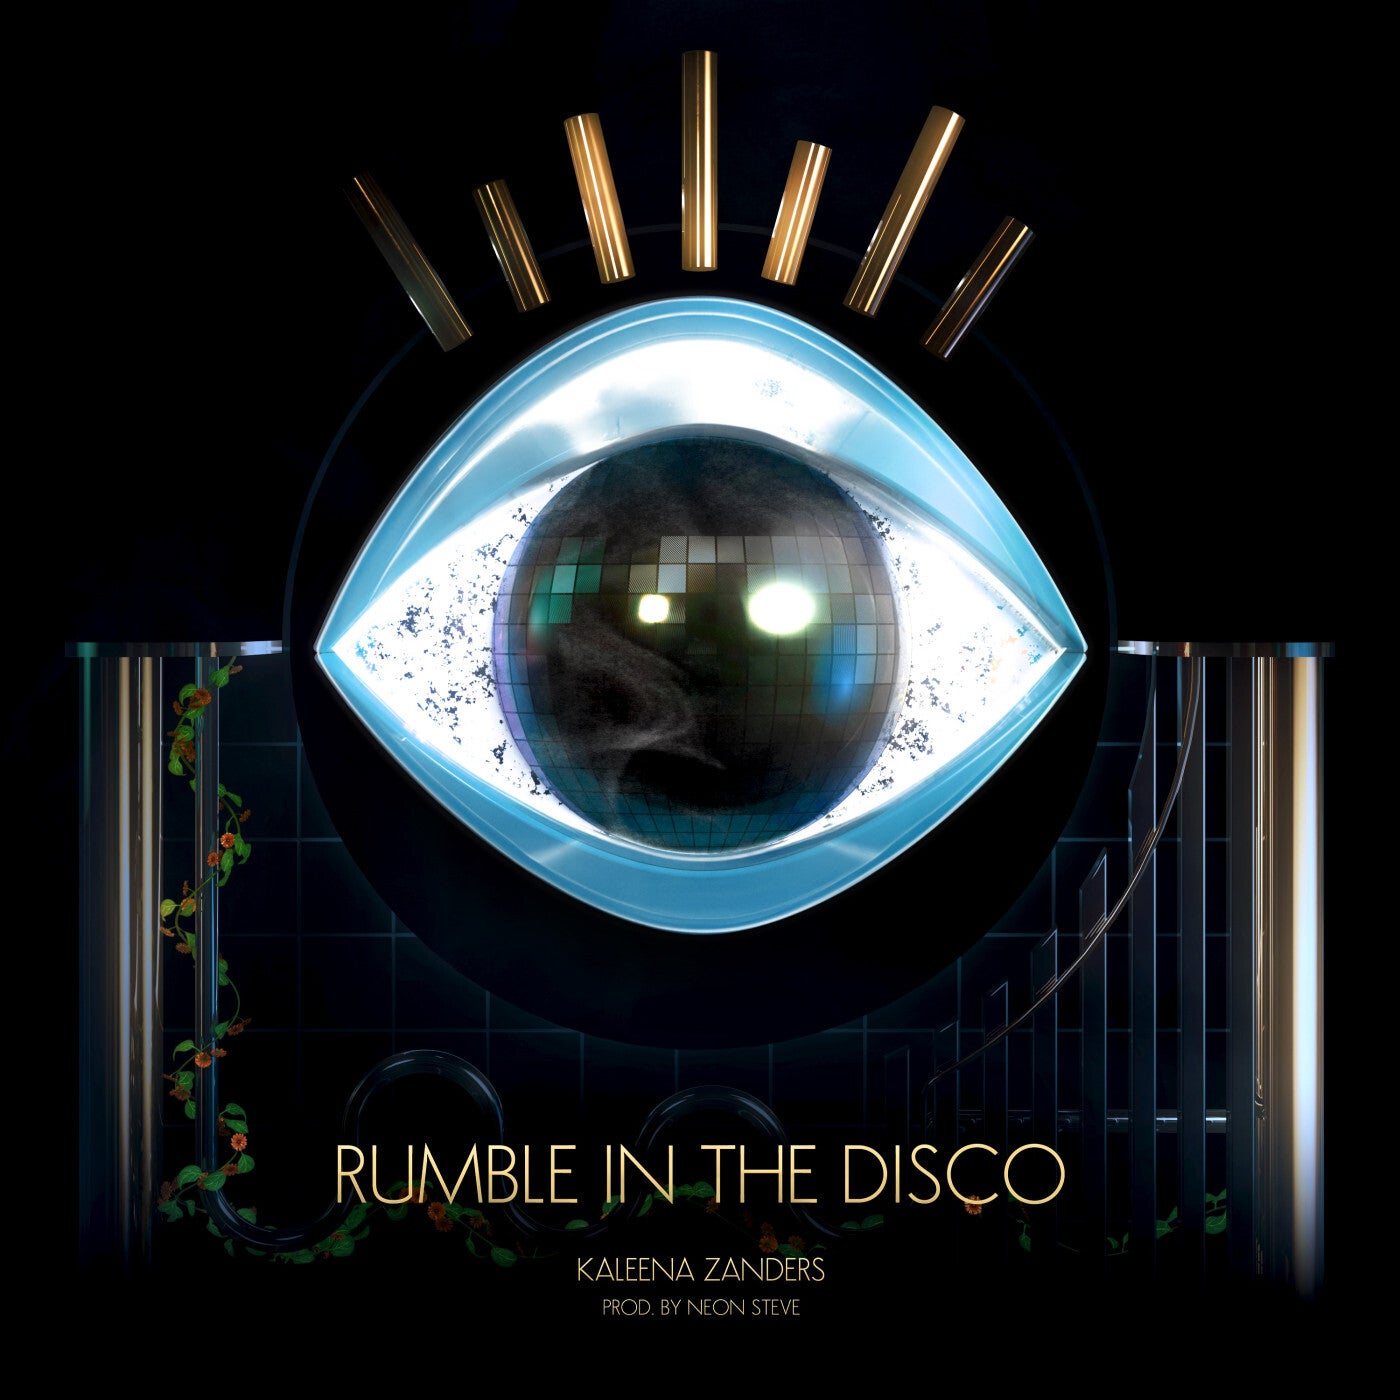 RUMBLE IN THE DISCO